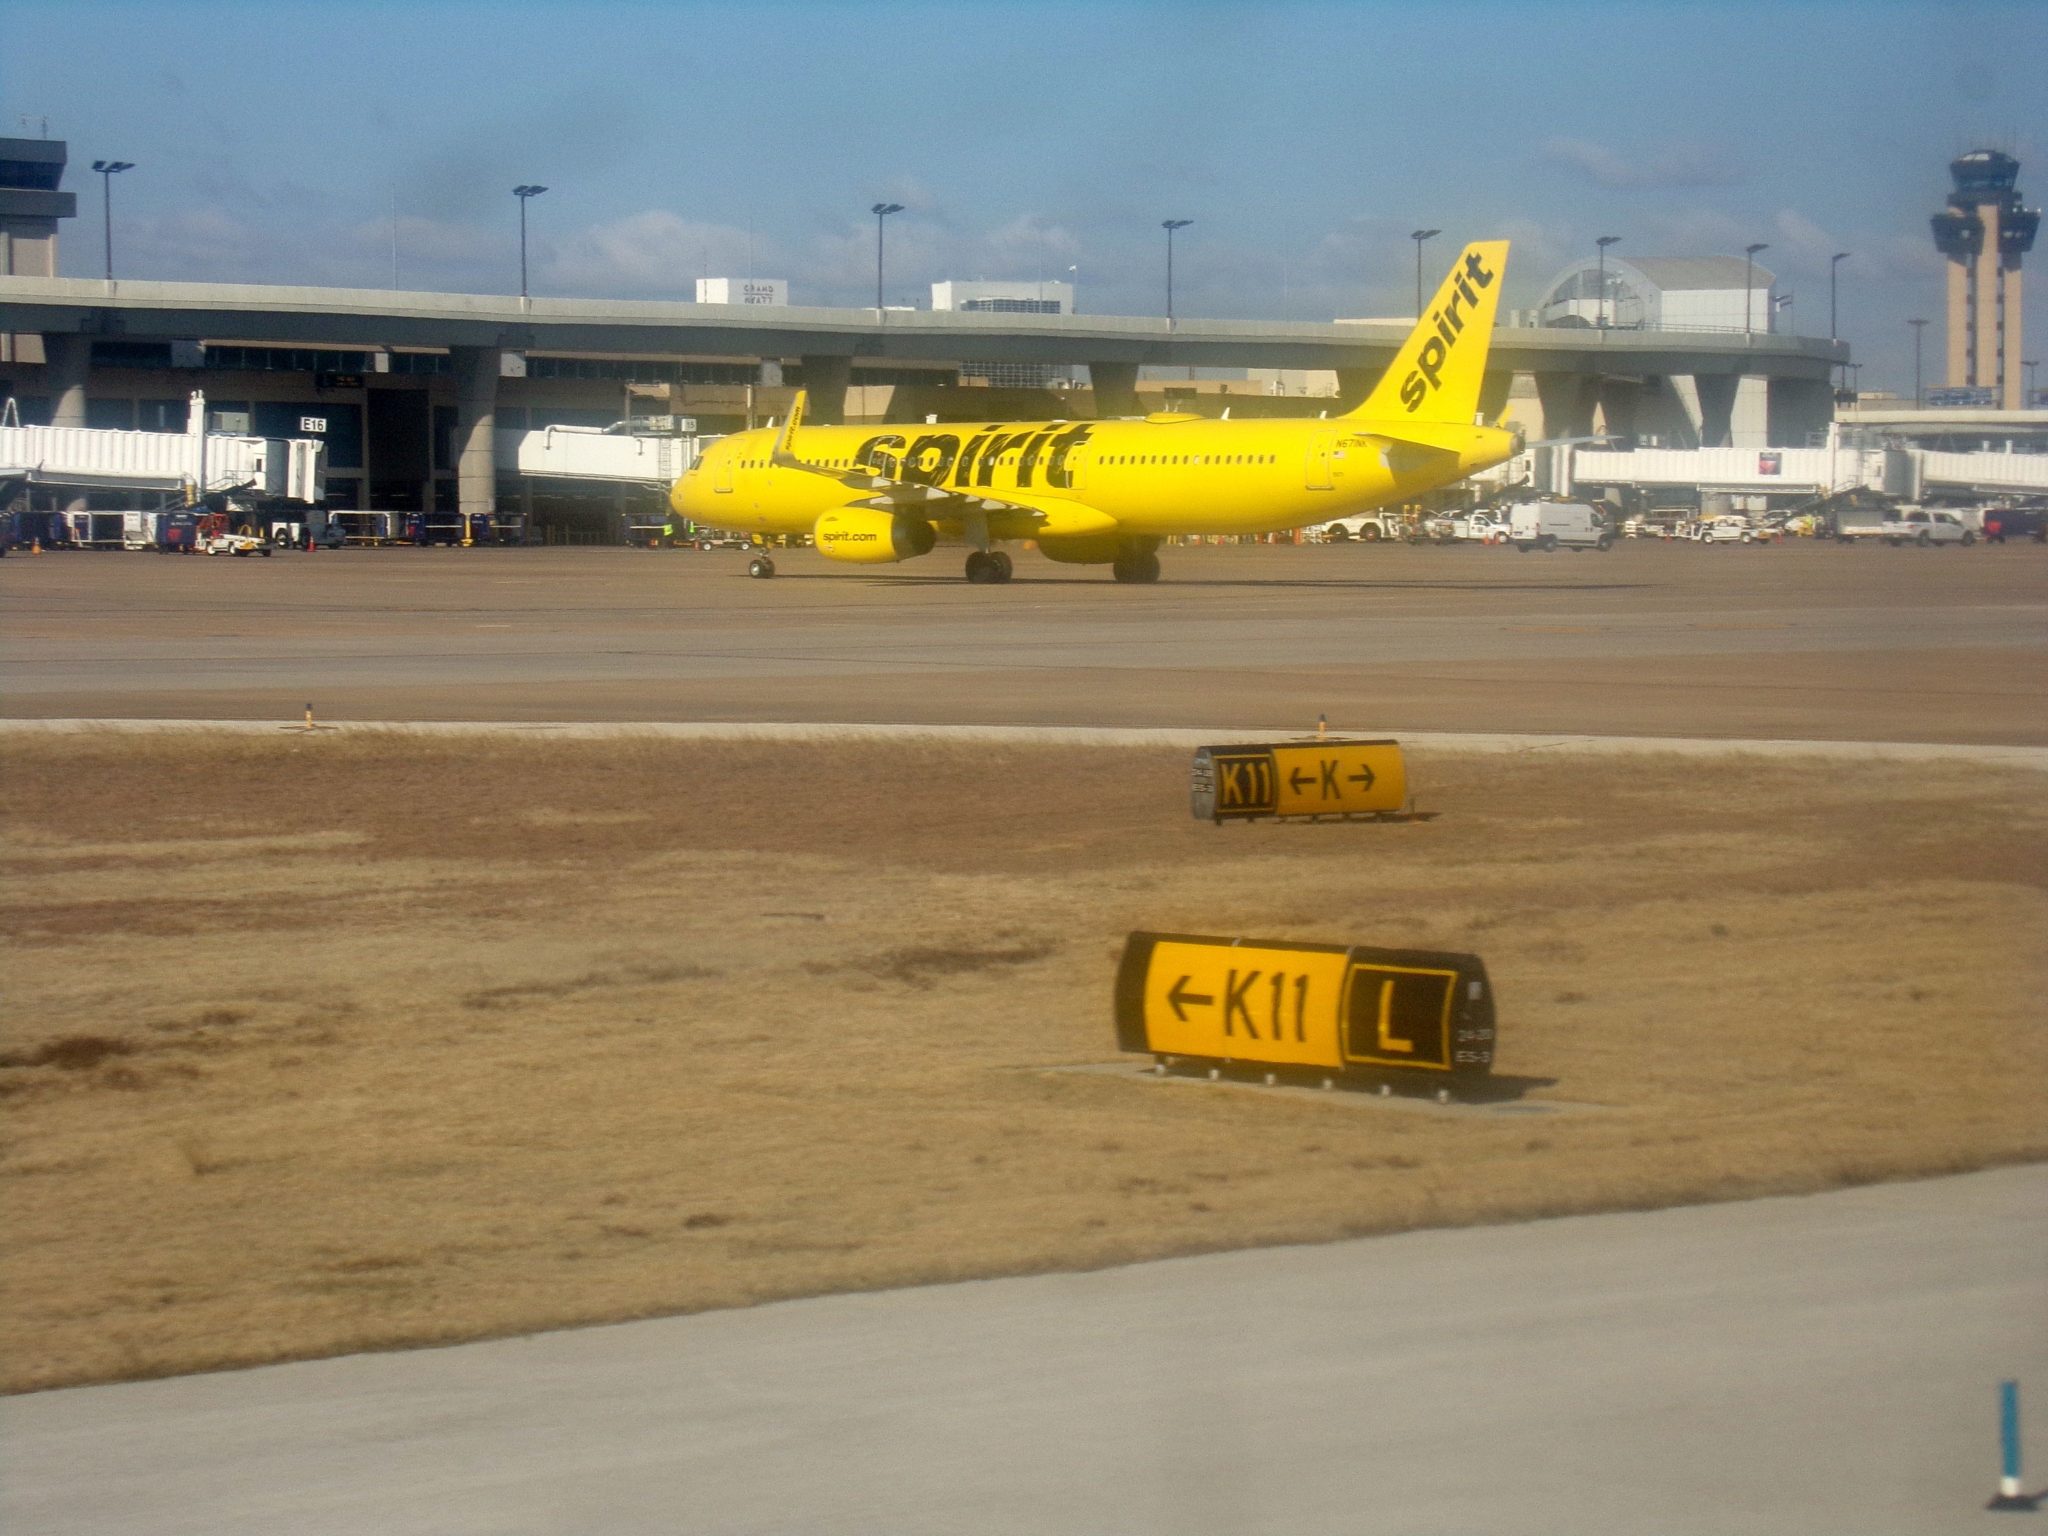 Spirit Airlines A320 at DFW